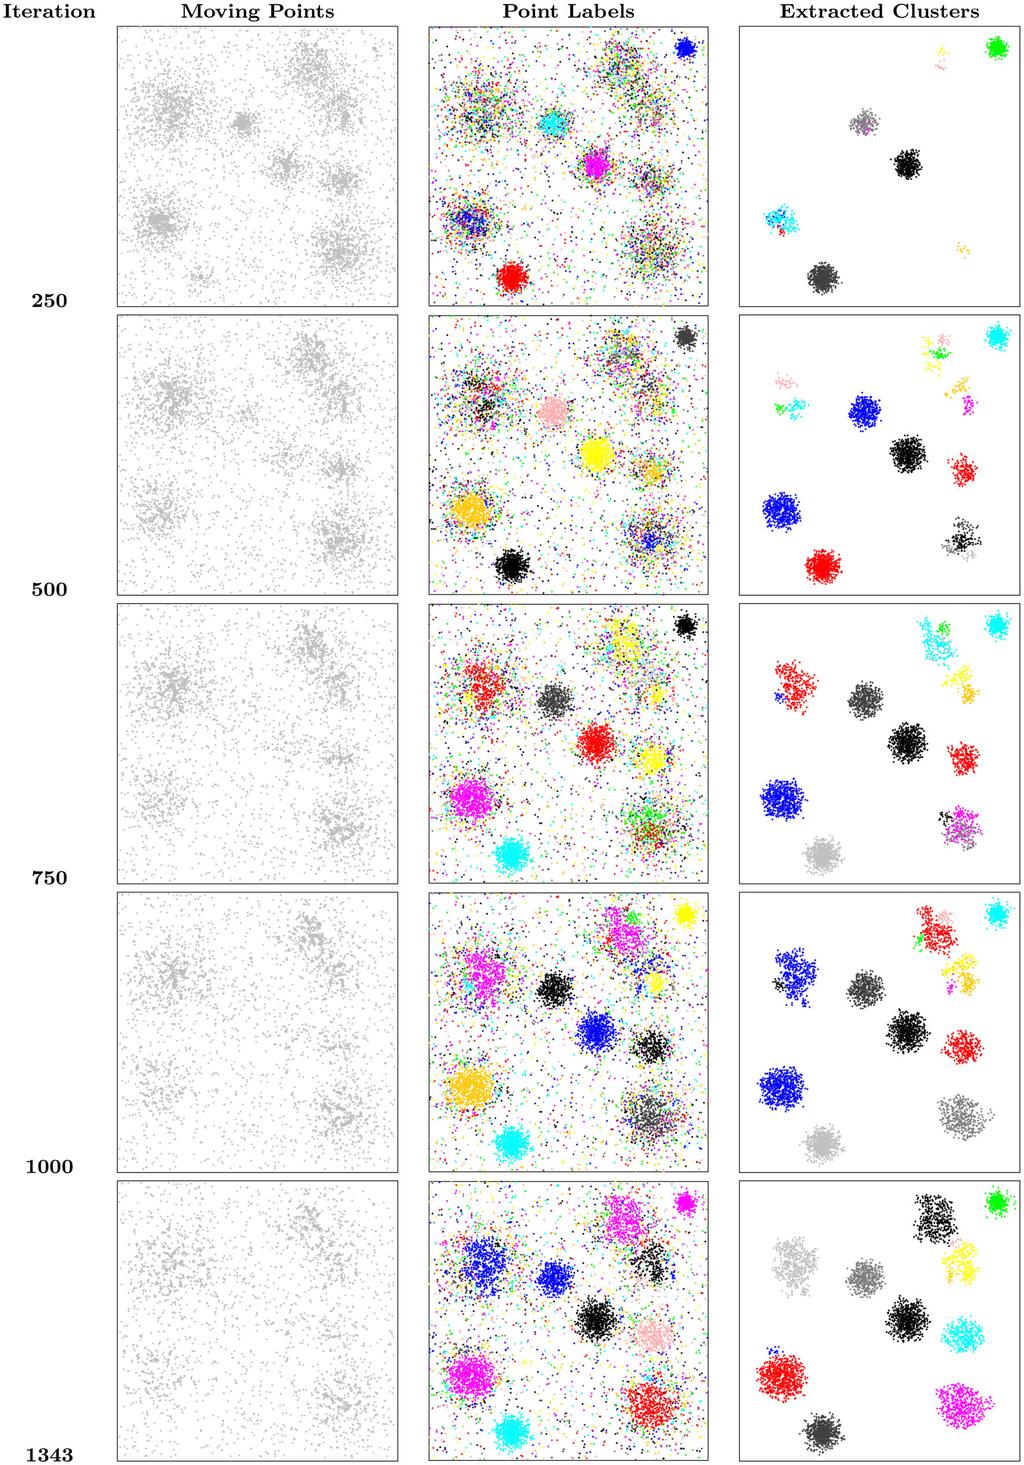 Prog Artif Intell (2014) 2:217 236 Fig. 4 Typical clustering result for the Gaussian ten clusters data set with 20 % of noise every 250 iterations.